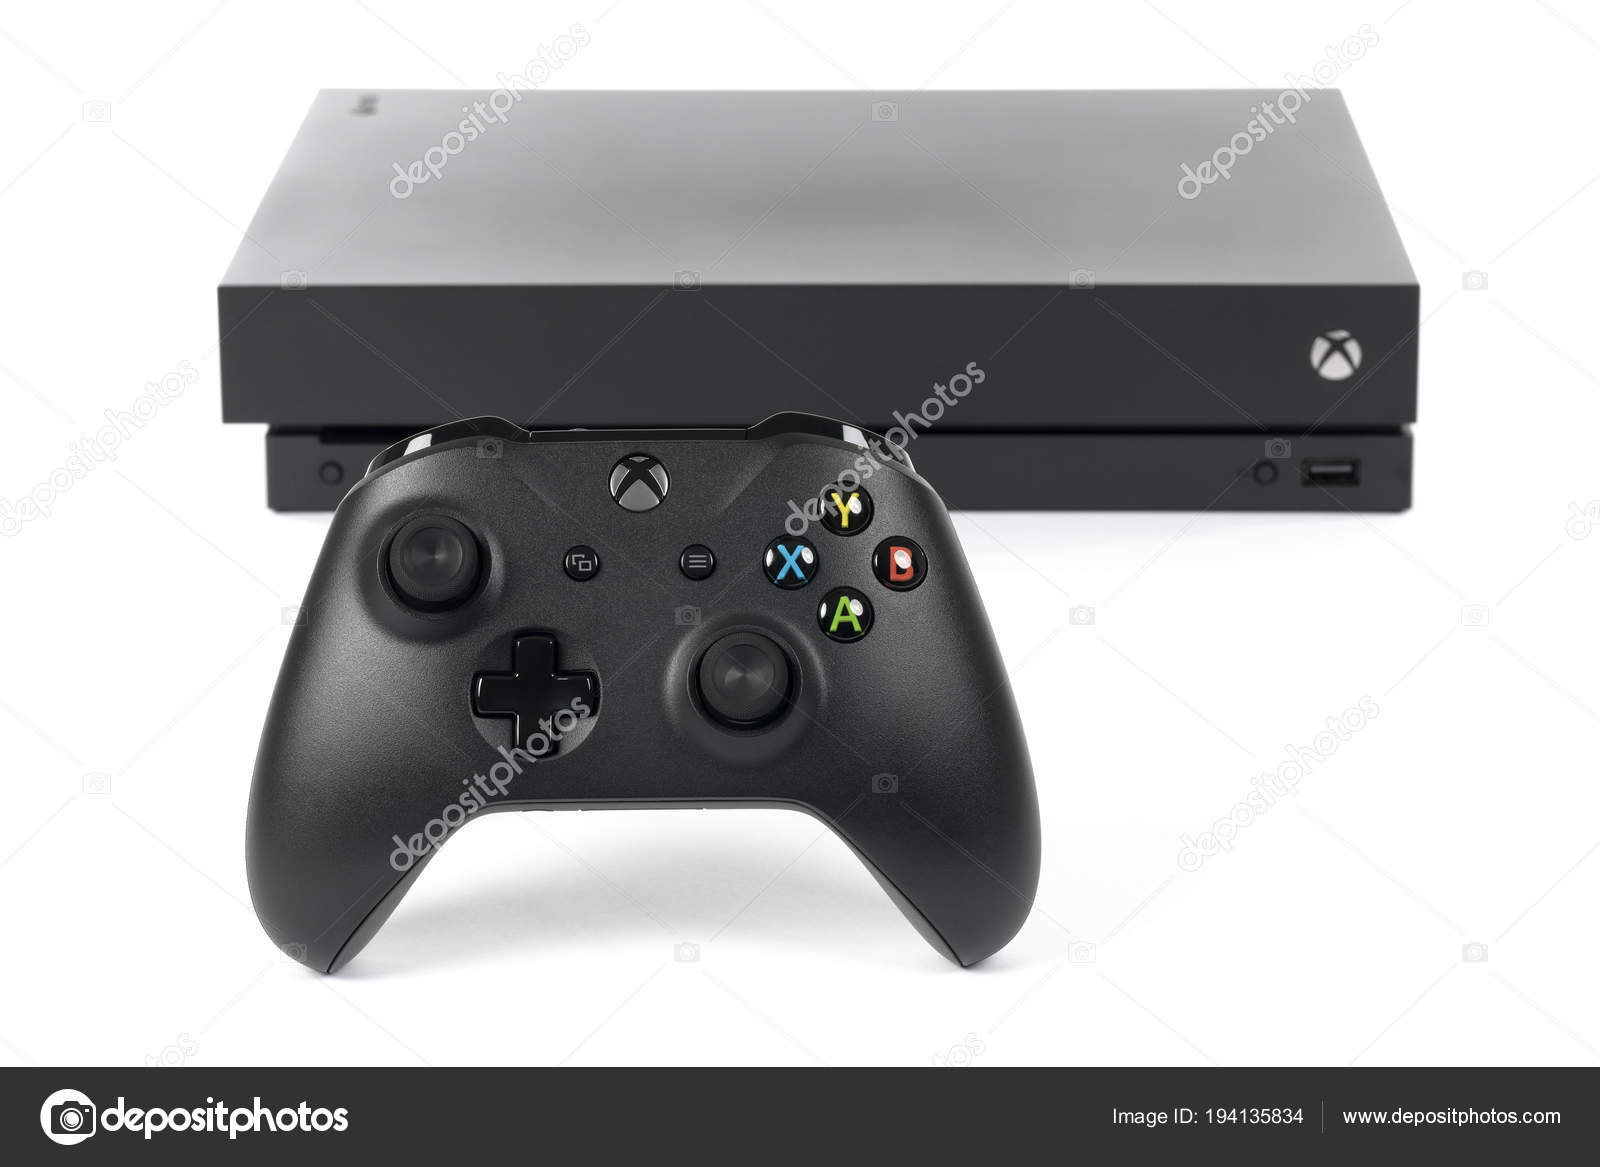 xbox video game system